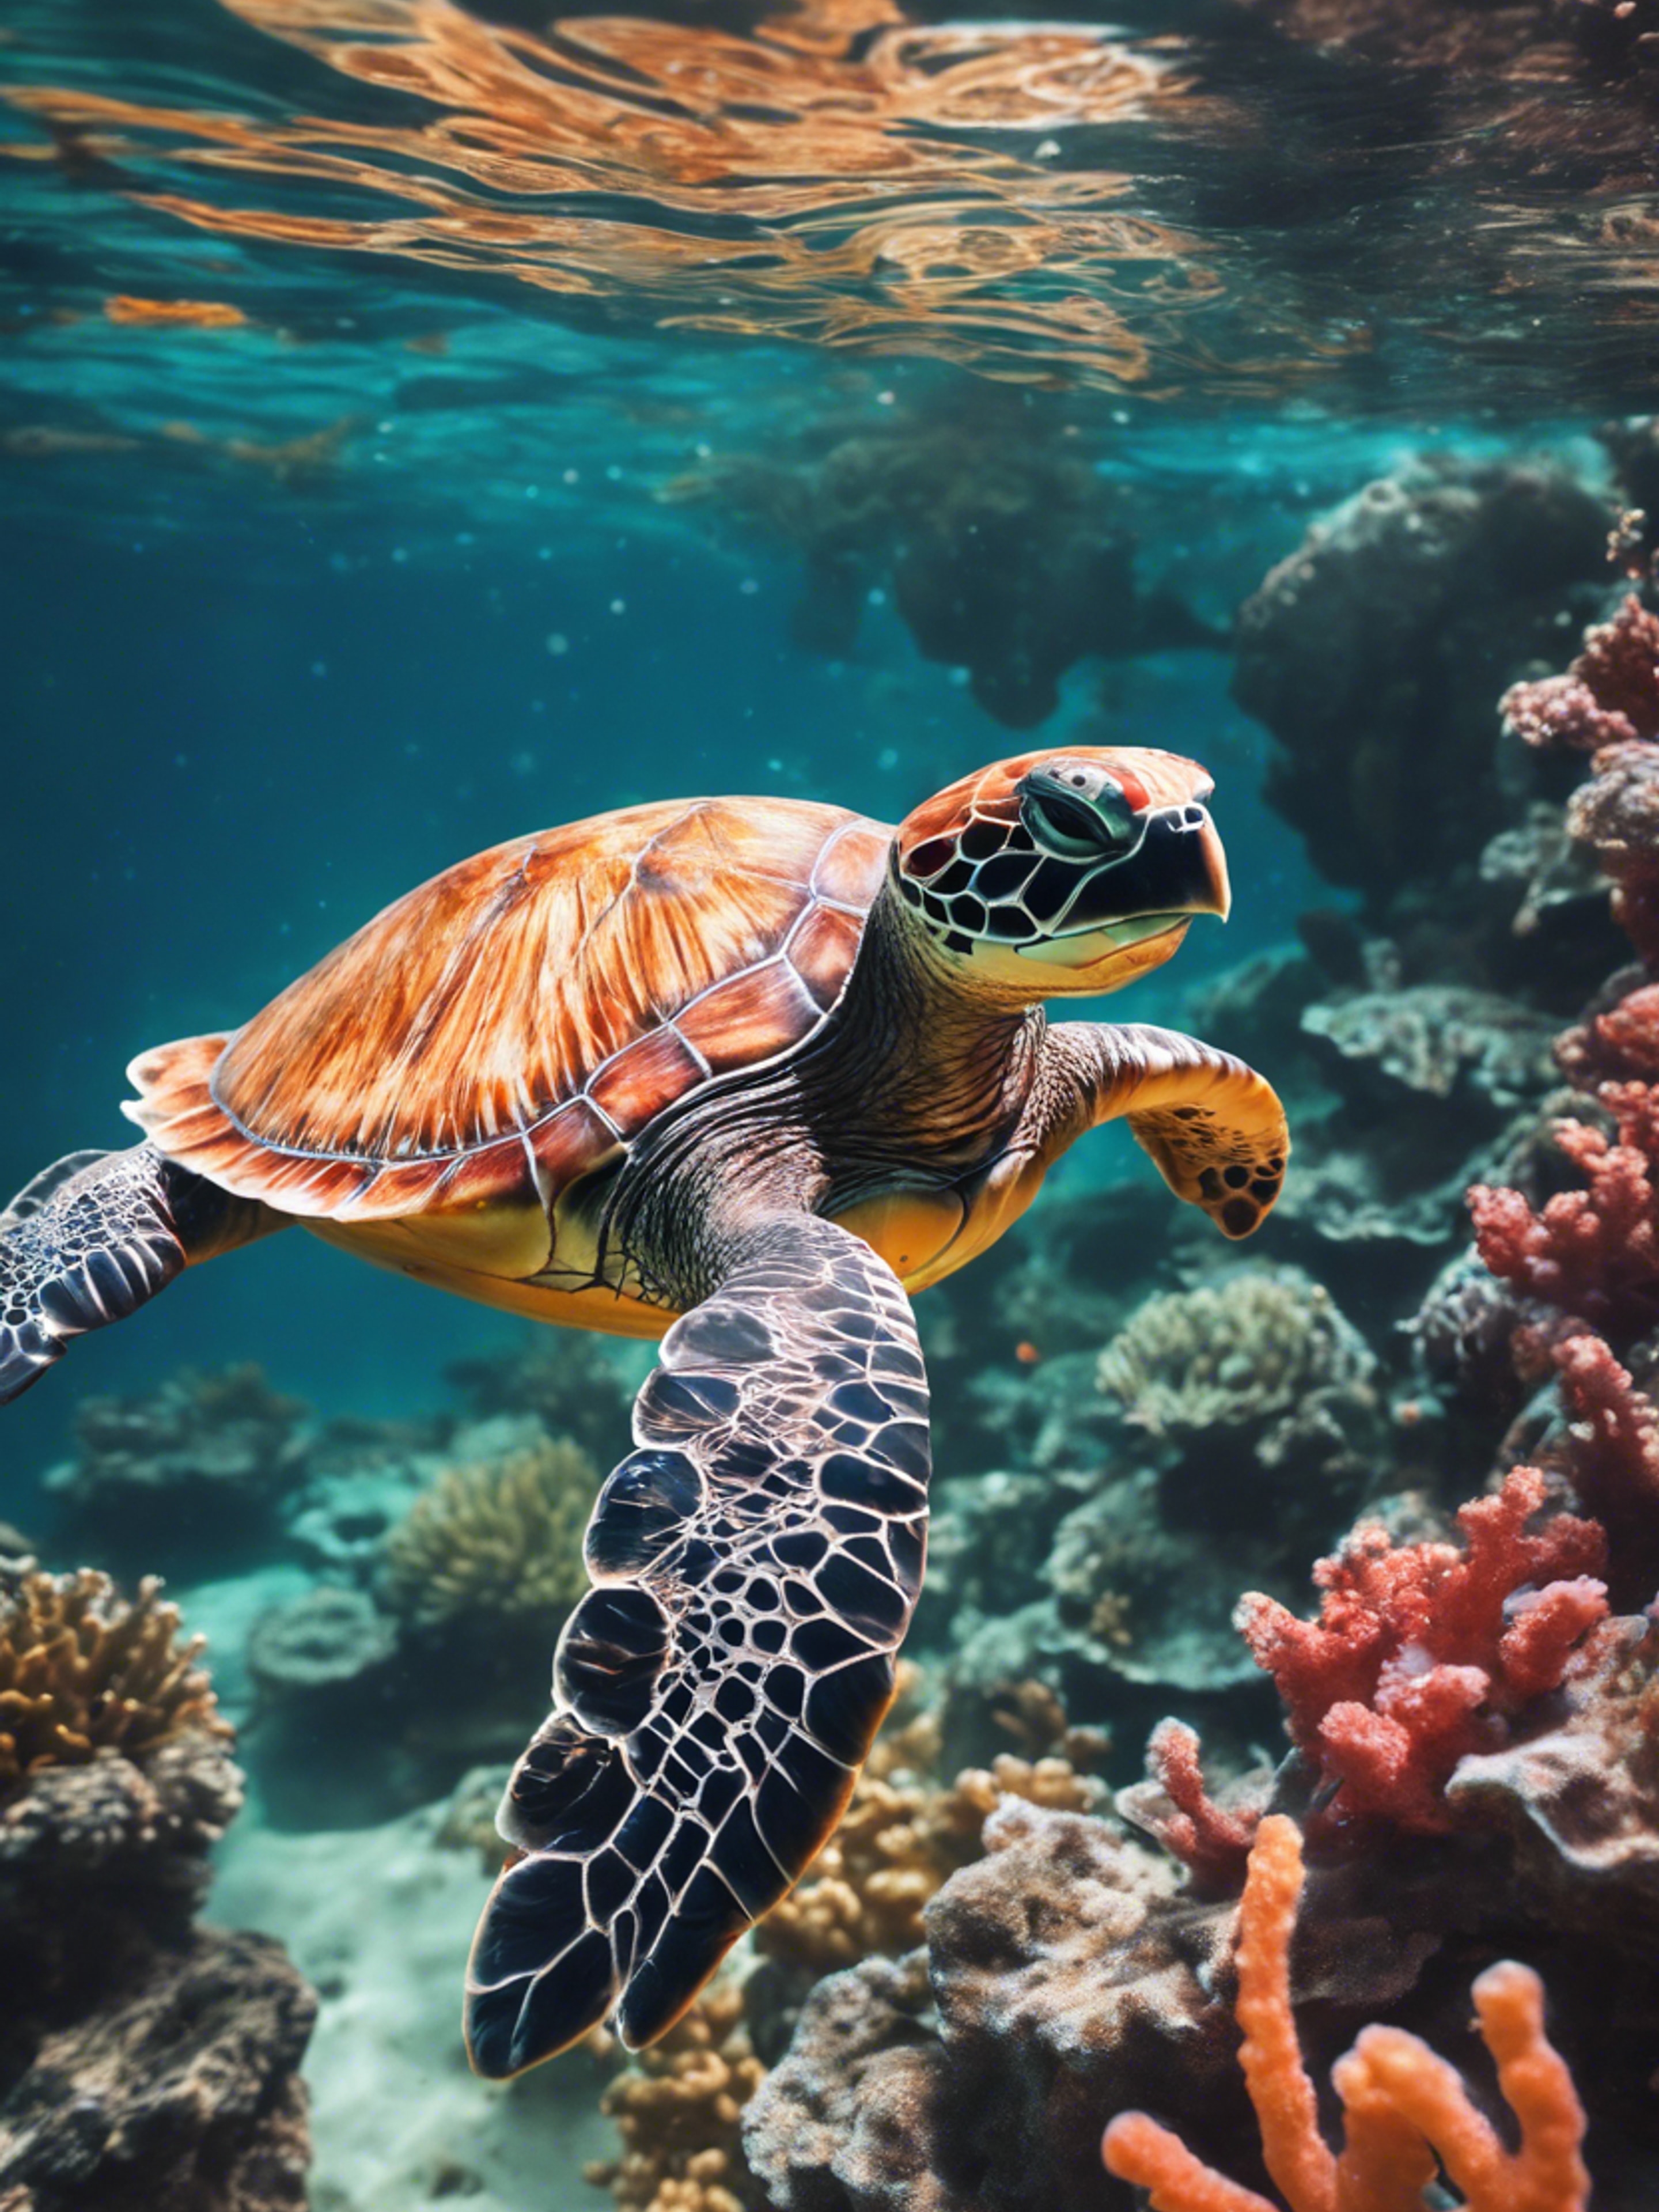 Underwater shot of a sea turtle gliding through clusters of colorful coral. Tapetai[31f5dd2c5e3745af9533]